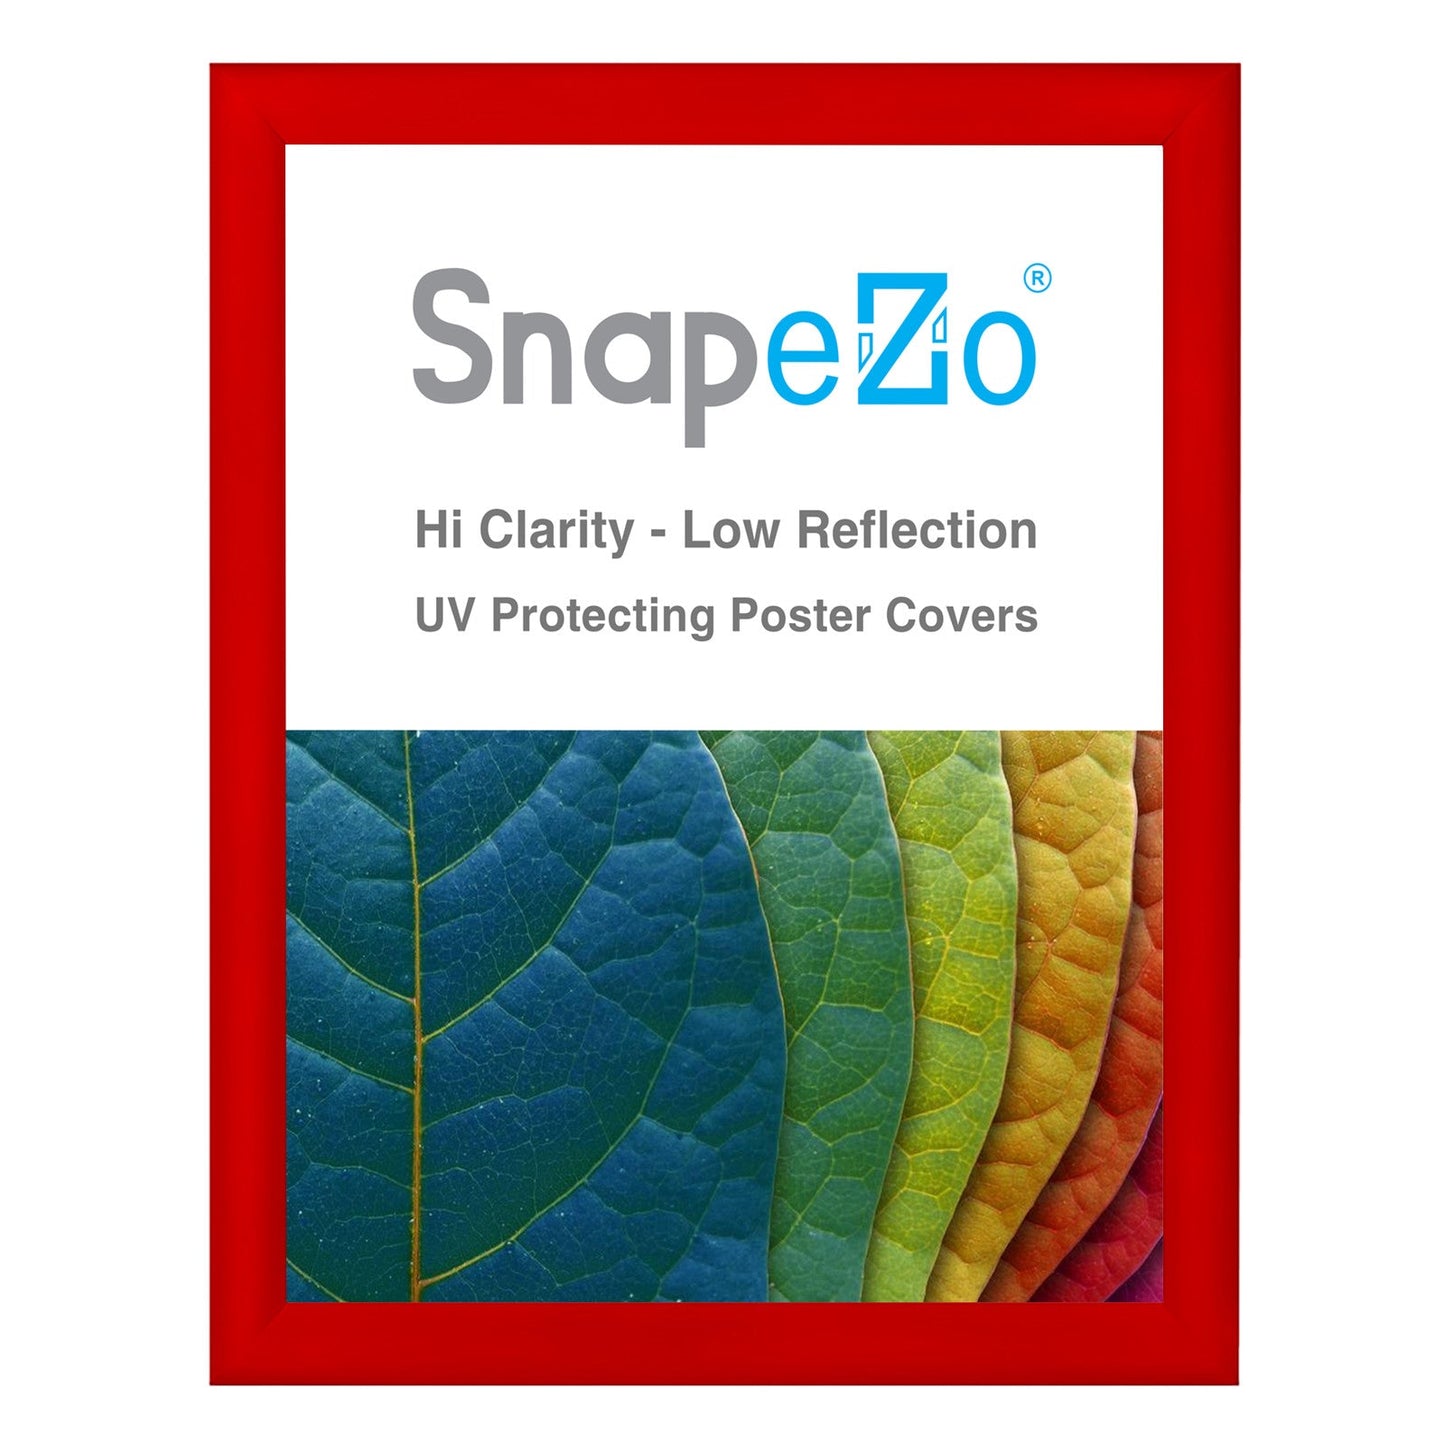 27x36 Red SnapeZo® Snap Frame - 1.2" Profile